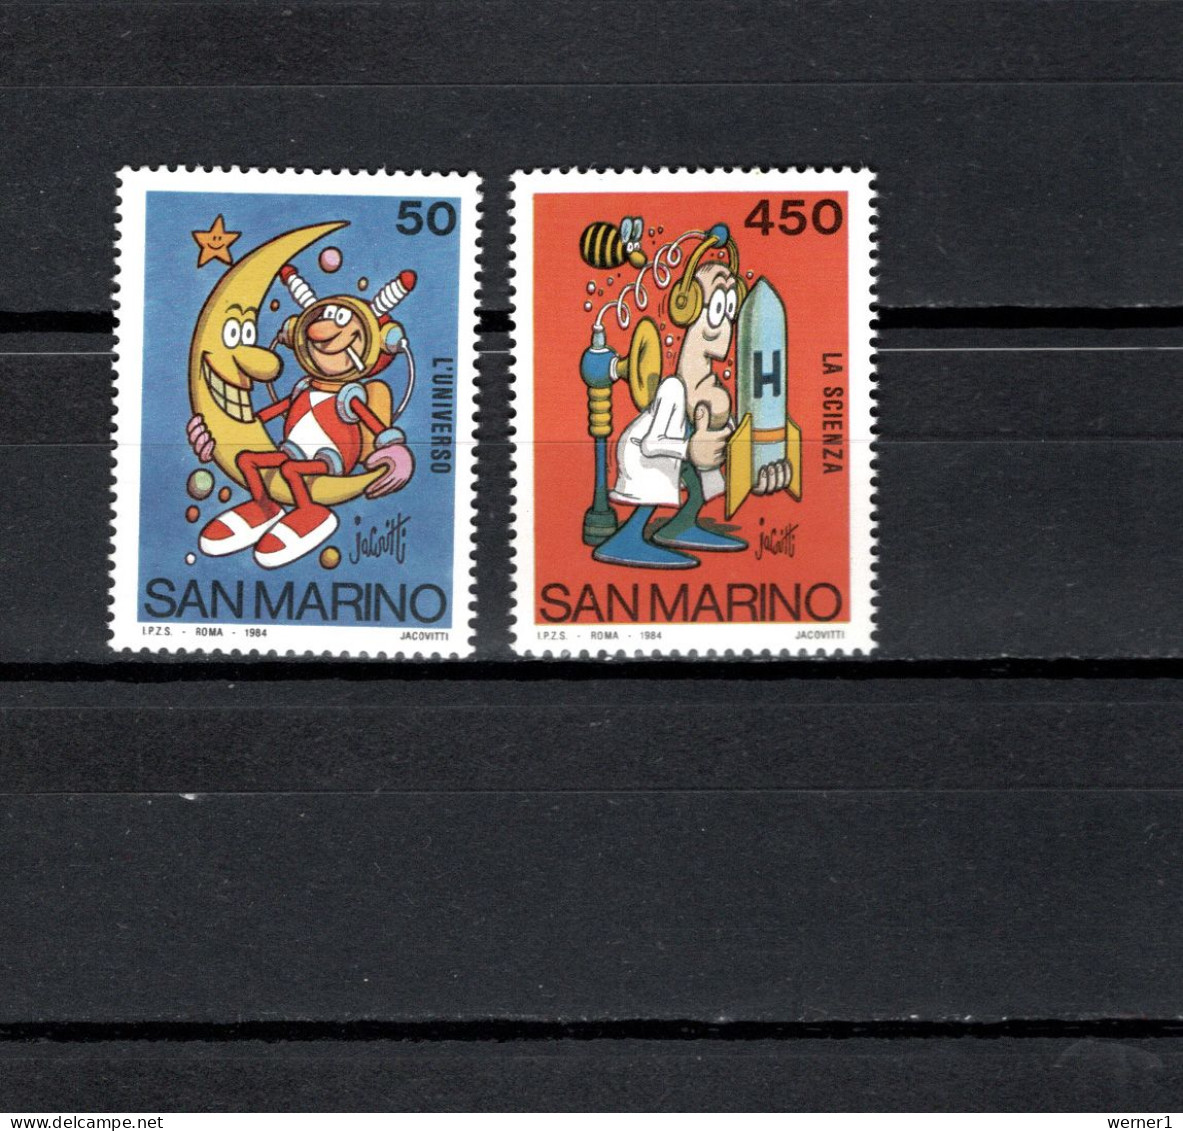 San Marino 1984 Space, Children And Philately 2 Stamps MNH - Europe